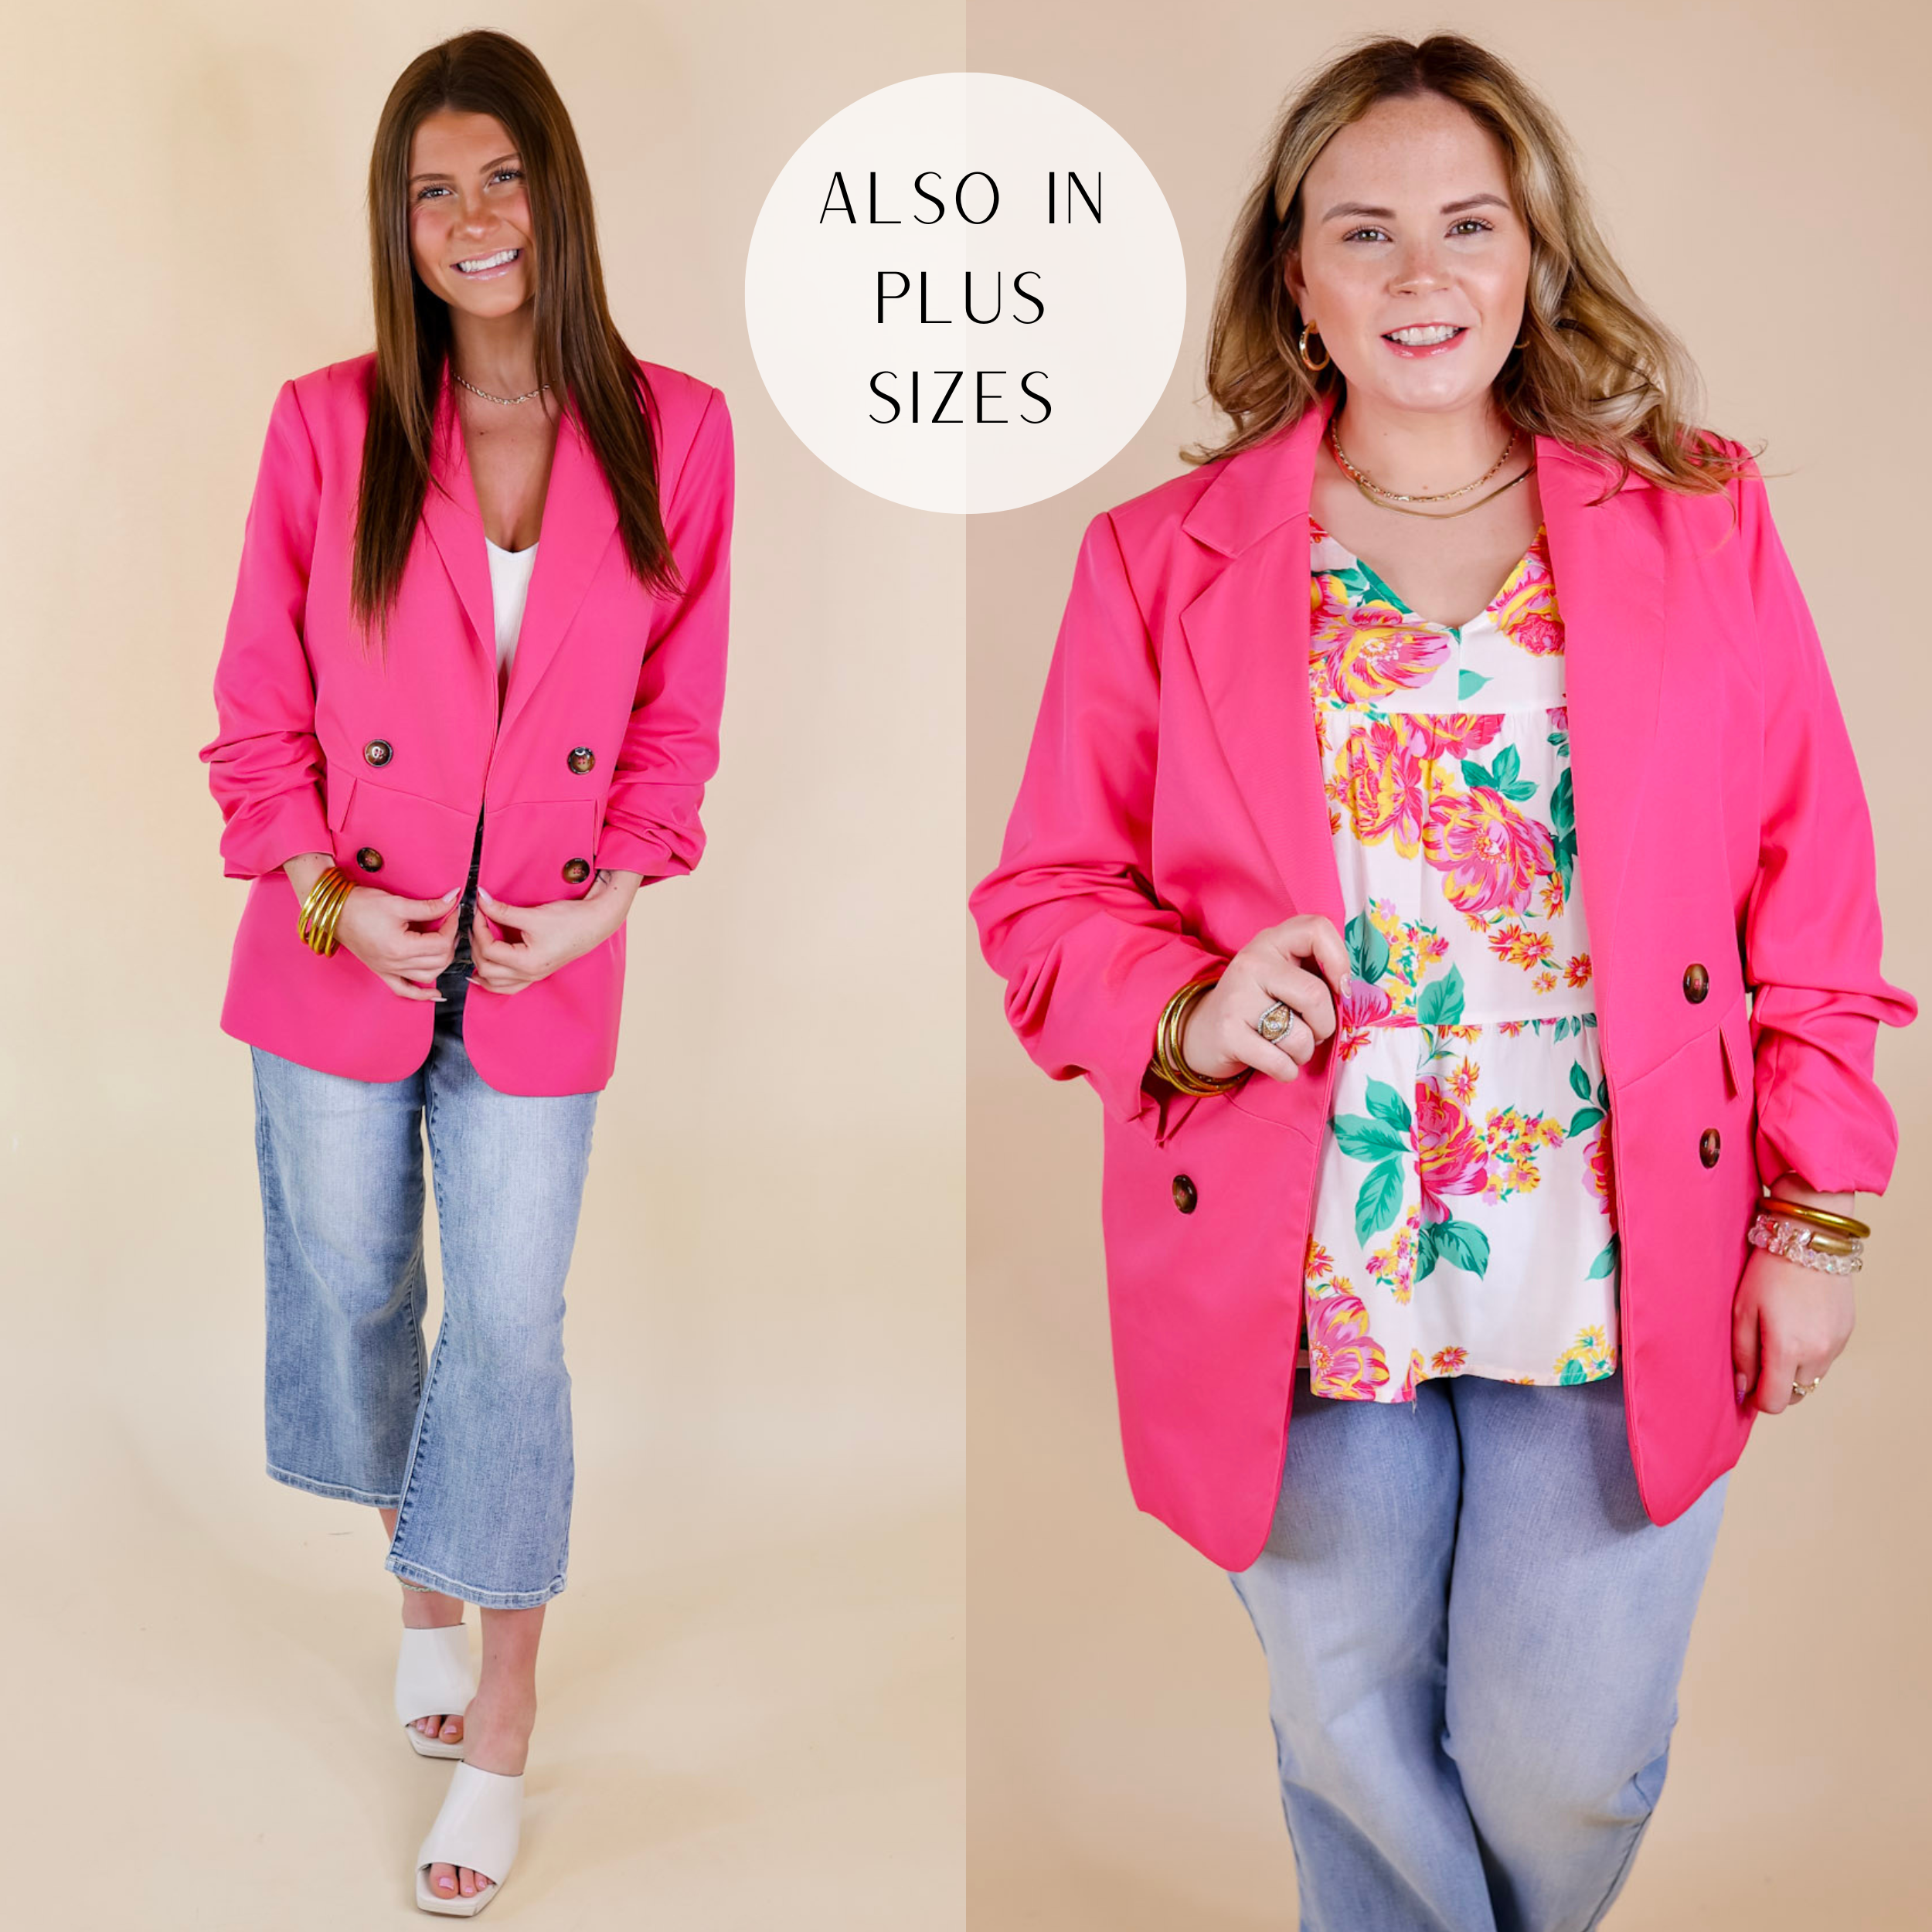 Models are wearing a pink blazer with a double button up front and 3/4 sleeves. Size small model has it paired with a white tank top, cropped jeans, ivory heels, and silver jewelry. Size large model has it paired with a floral top, light wash jeans, and gold jewelry.